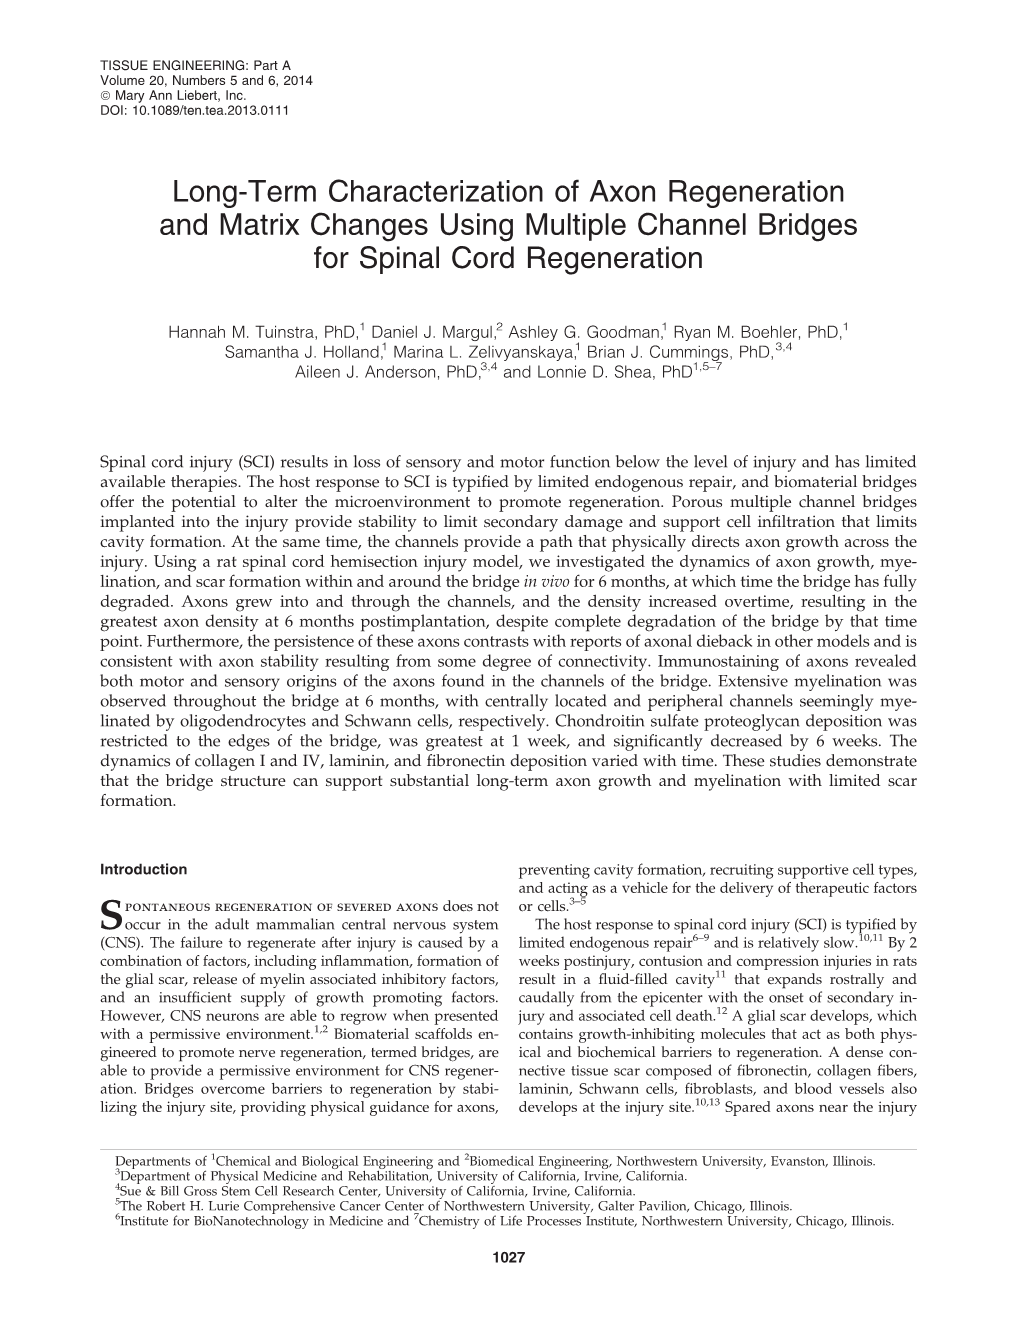 Long-Term Characterization of Axon Regeneration and Matrix Changes Using Multiple Channel Bridges for Spinal Cord Regeneration